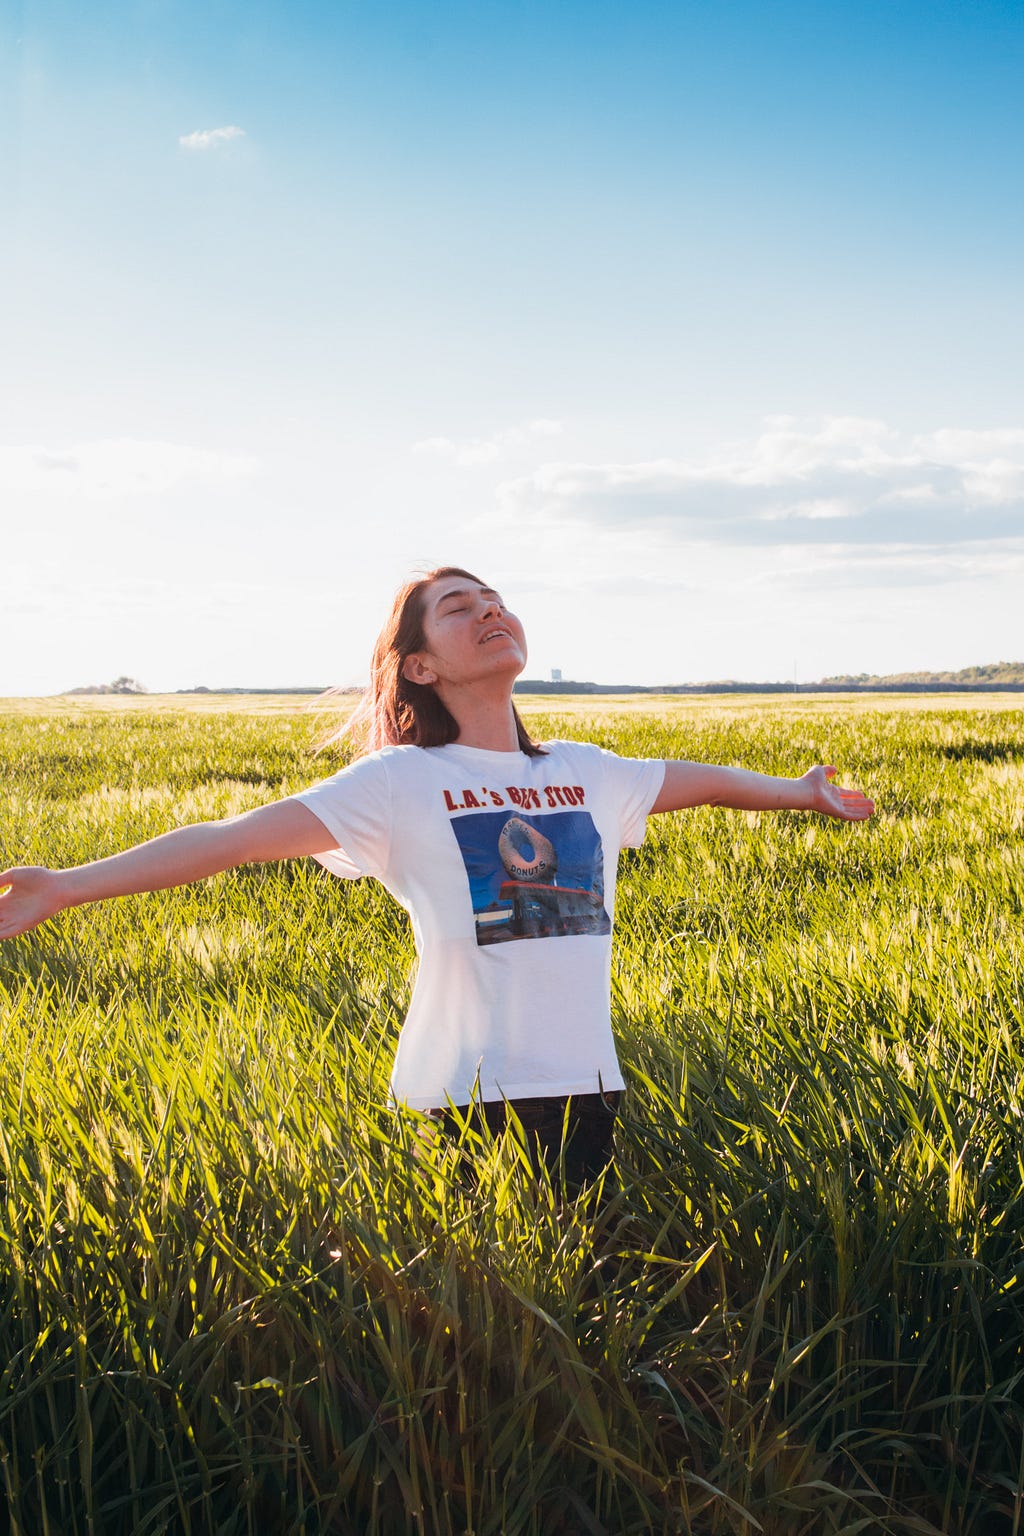 A joyful woman spreads out her arms in a grassy field.